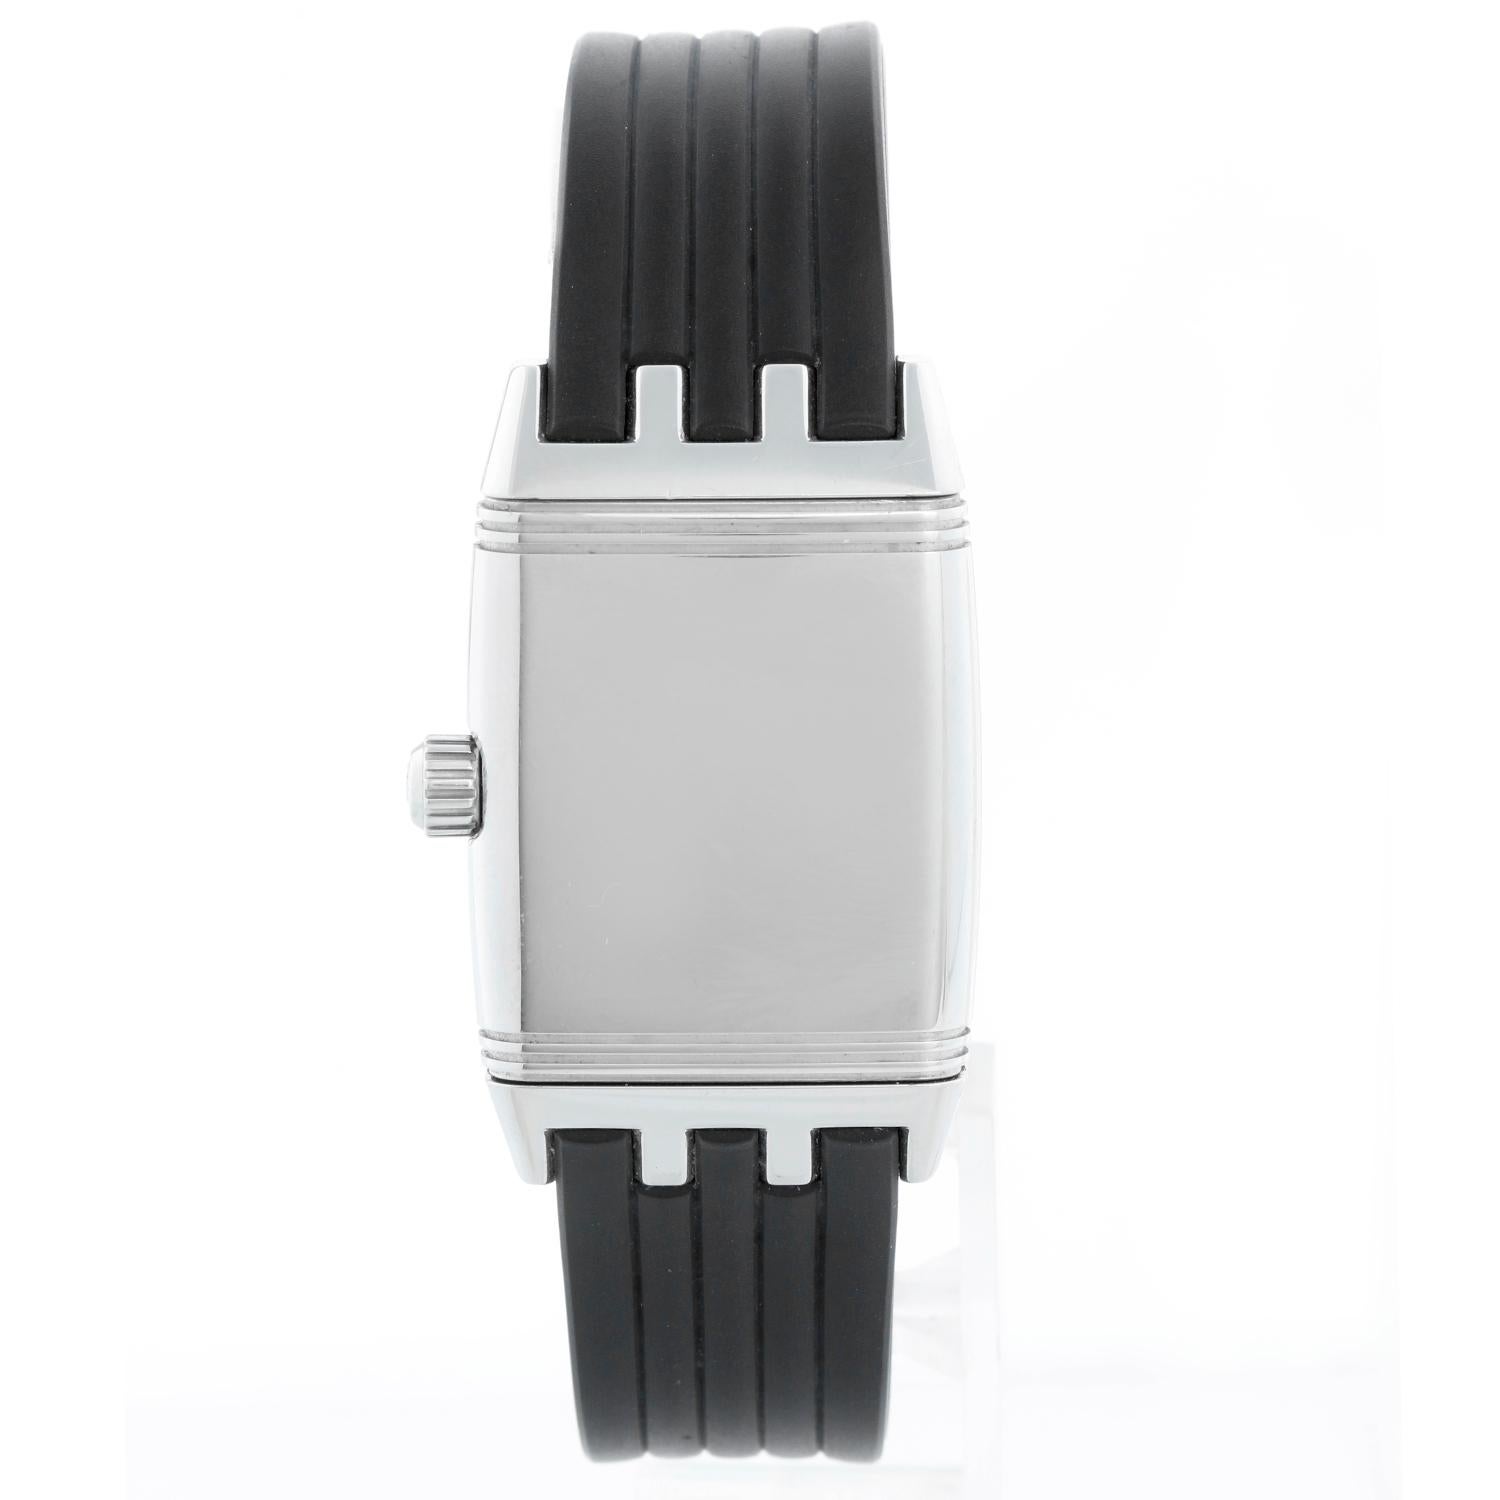 Jaeger-LeCoultre Reverso Gran Sport Men's Stainless Steel Watch 290.8.60 (or 290860) - Automatic winding. Stainless steel case reverses from solid case with monogram to black dial (25mm x 45mm). Black dial with luminous style Arabic 3 & 9; date at 6